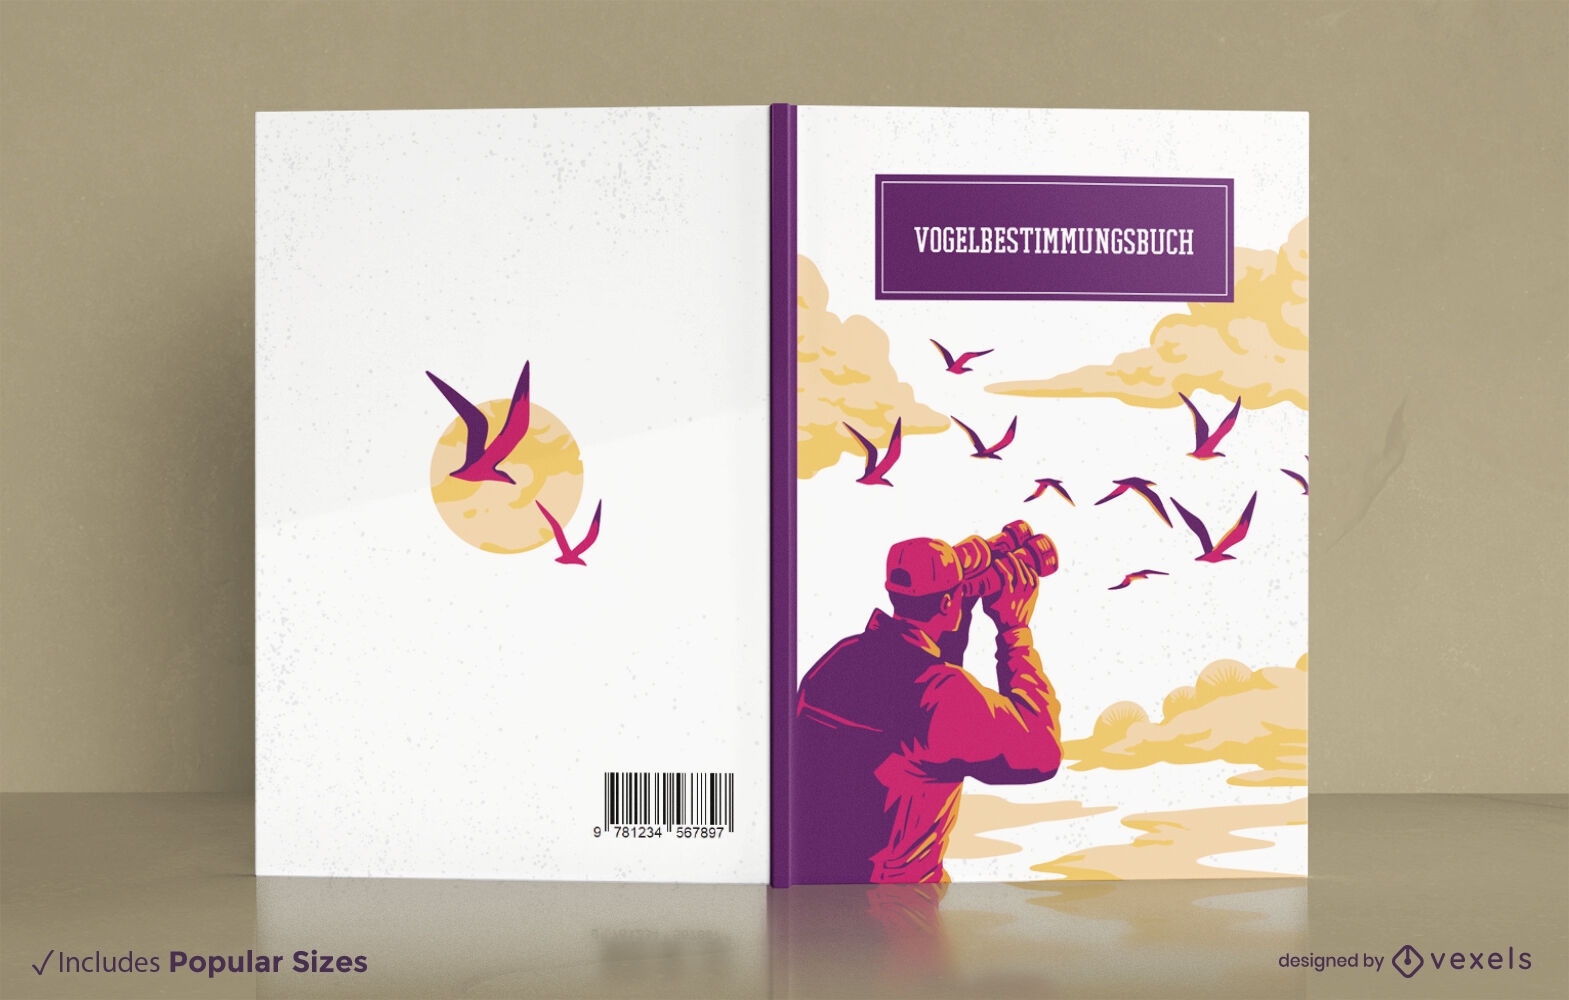 Person watching birds in the sky book cover design